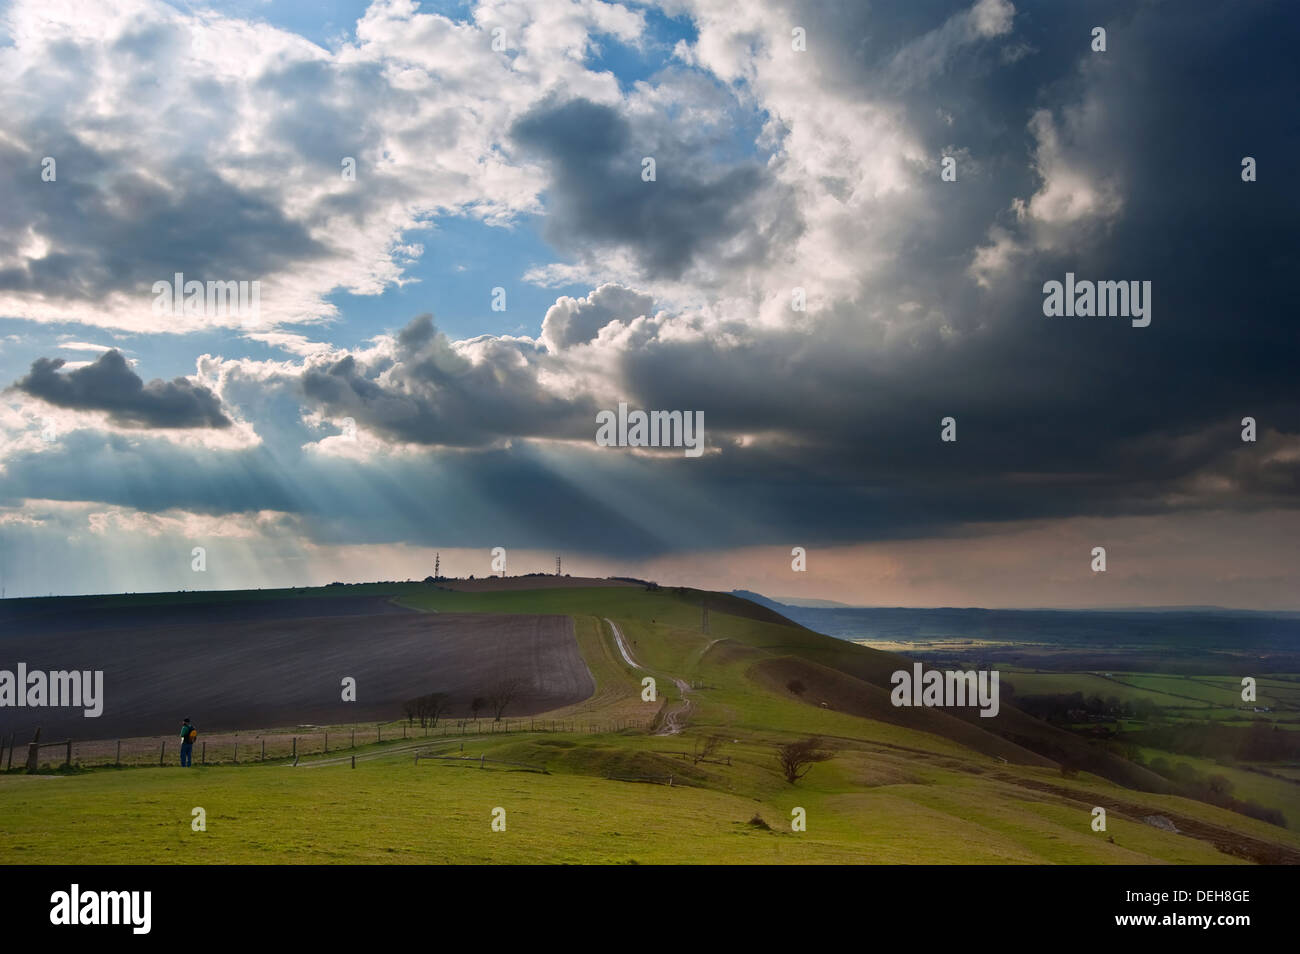 Beautiful countryside landscape across rolling hills with lovely cloud formations Stock Photo